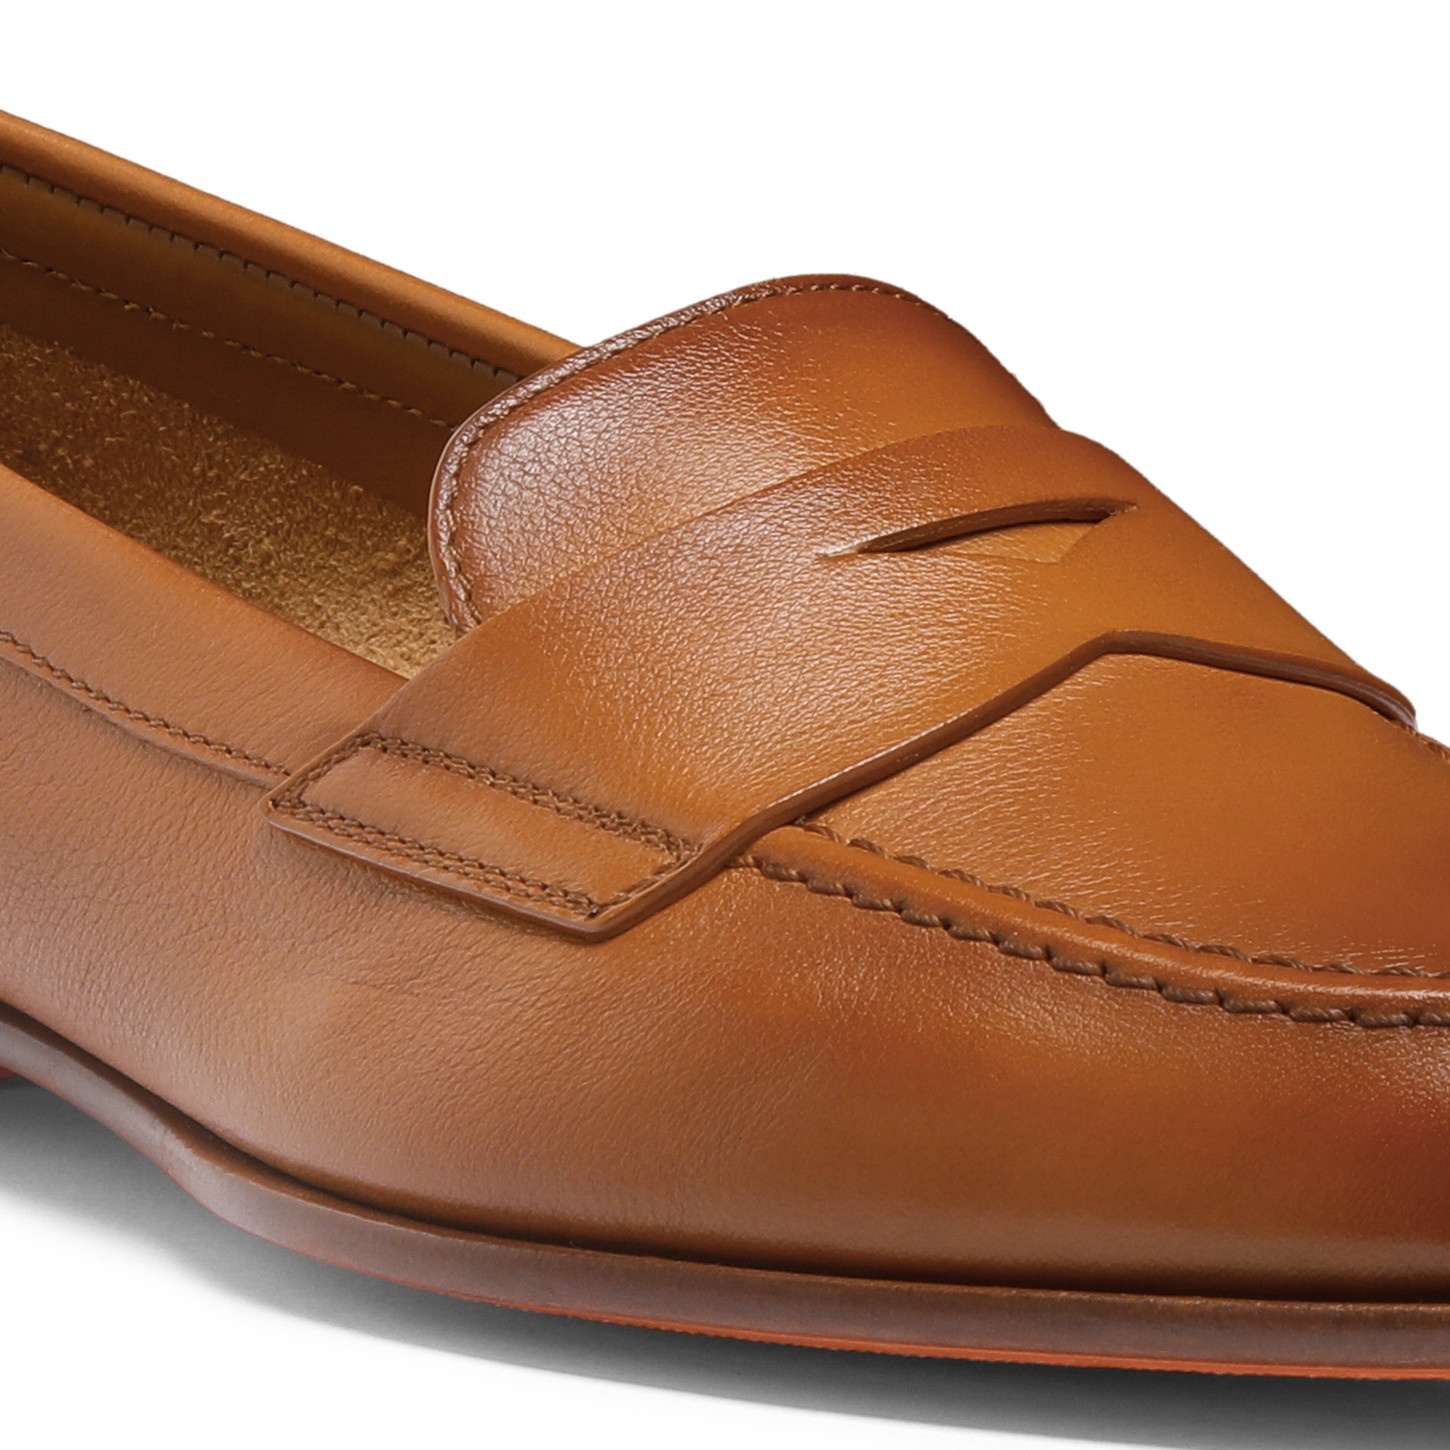 Women’s brown leather penny loafer - 6